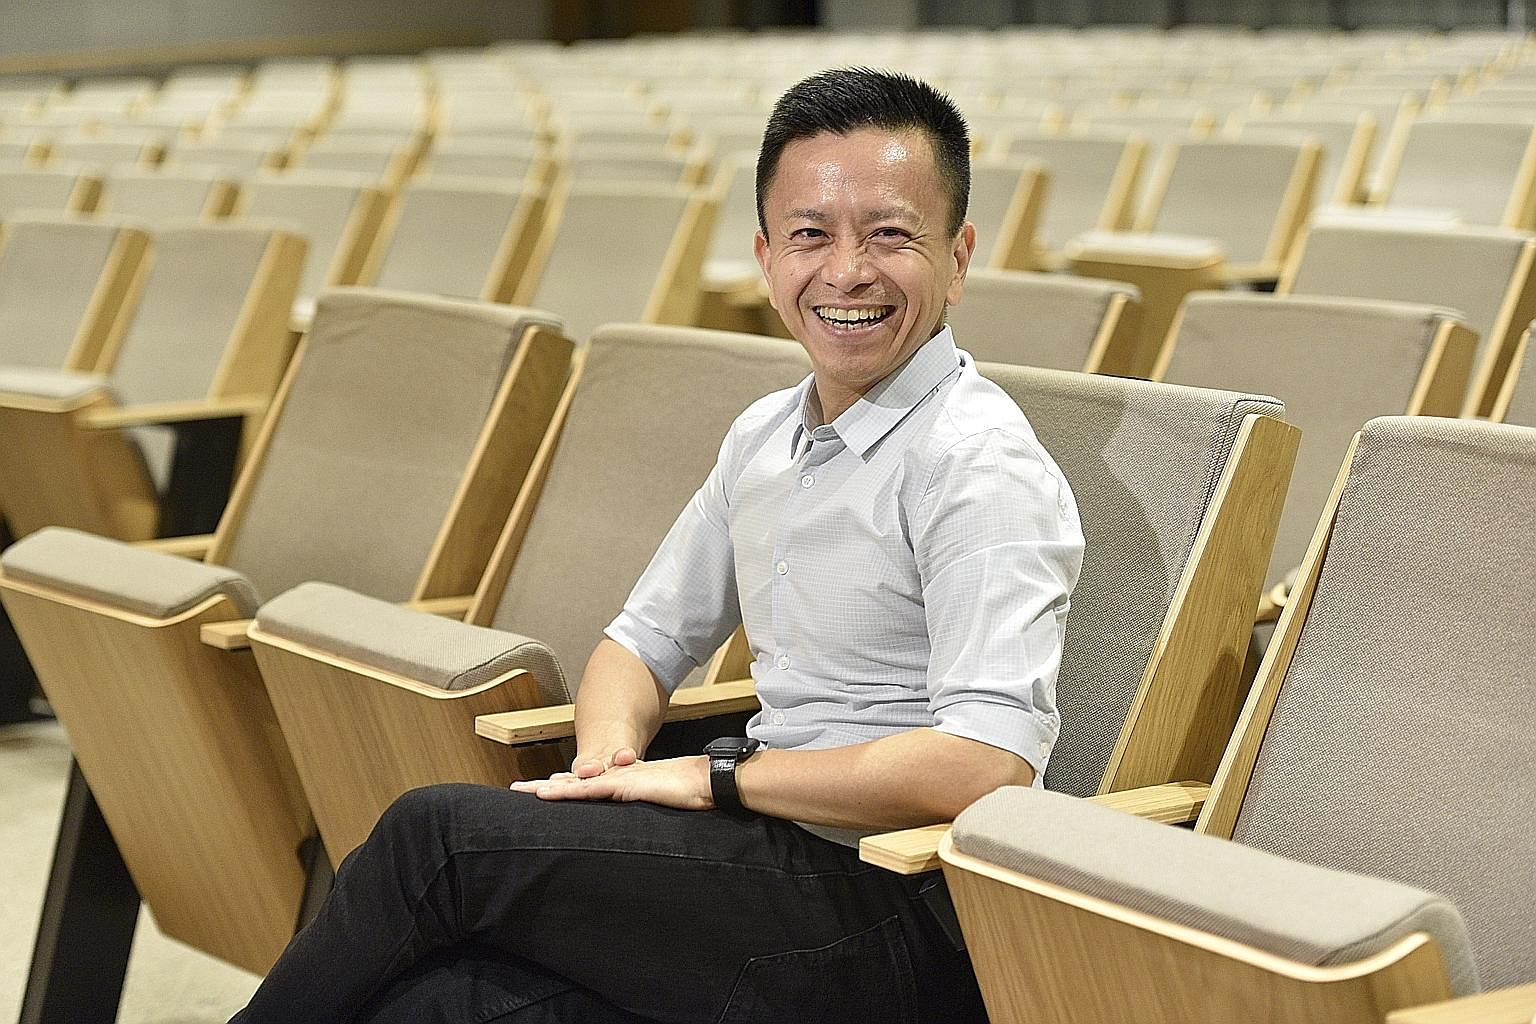 Senior pastor Wilson Teo, who has recovered, says the cluster of infections at his church has brought his team closer but admits they were not prepared for the crisis when it happened.